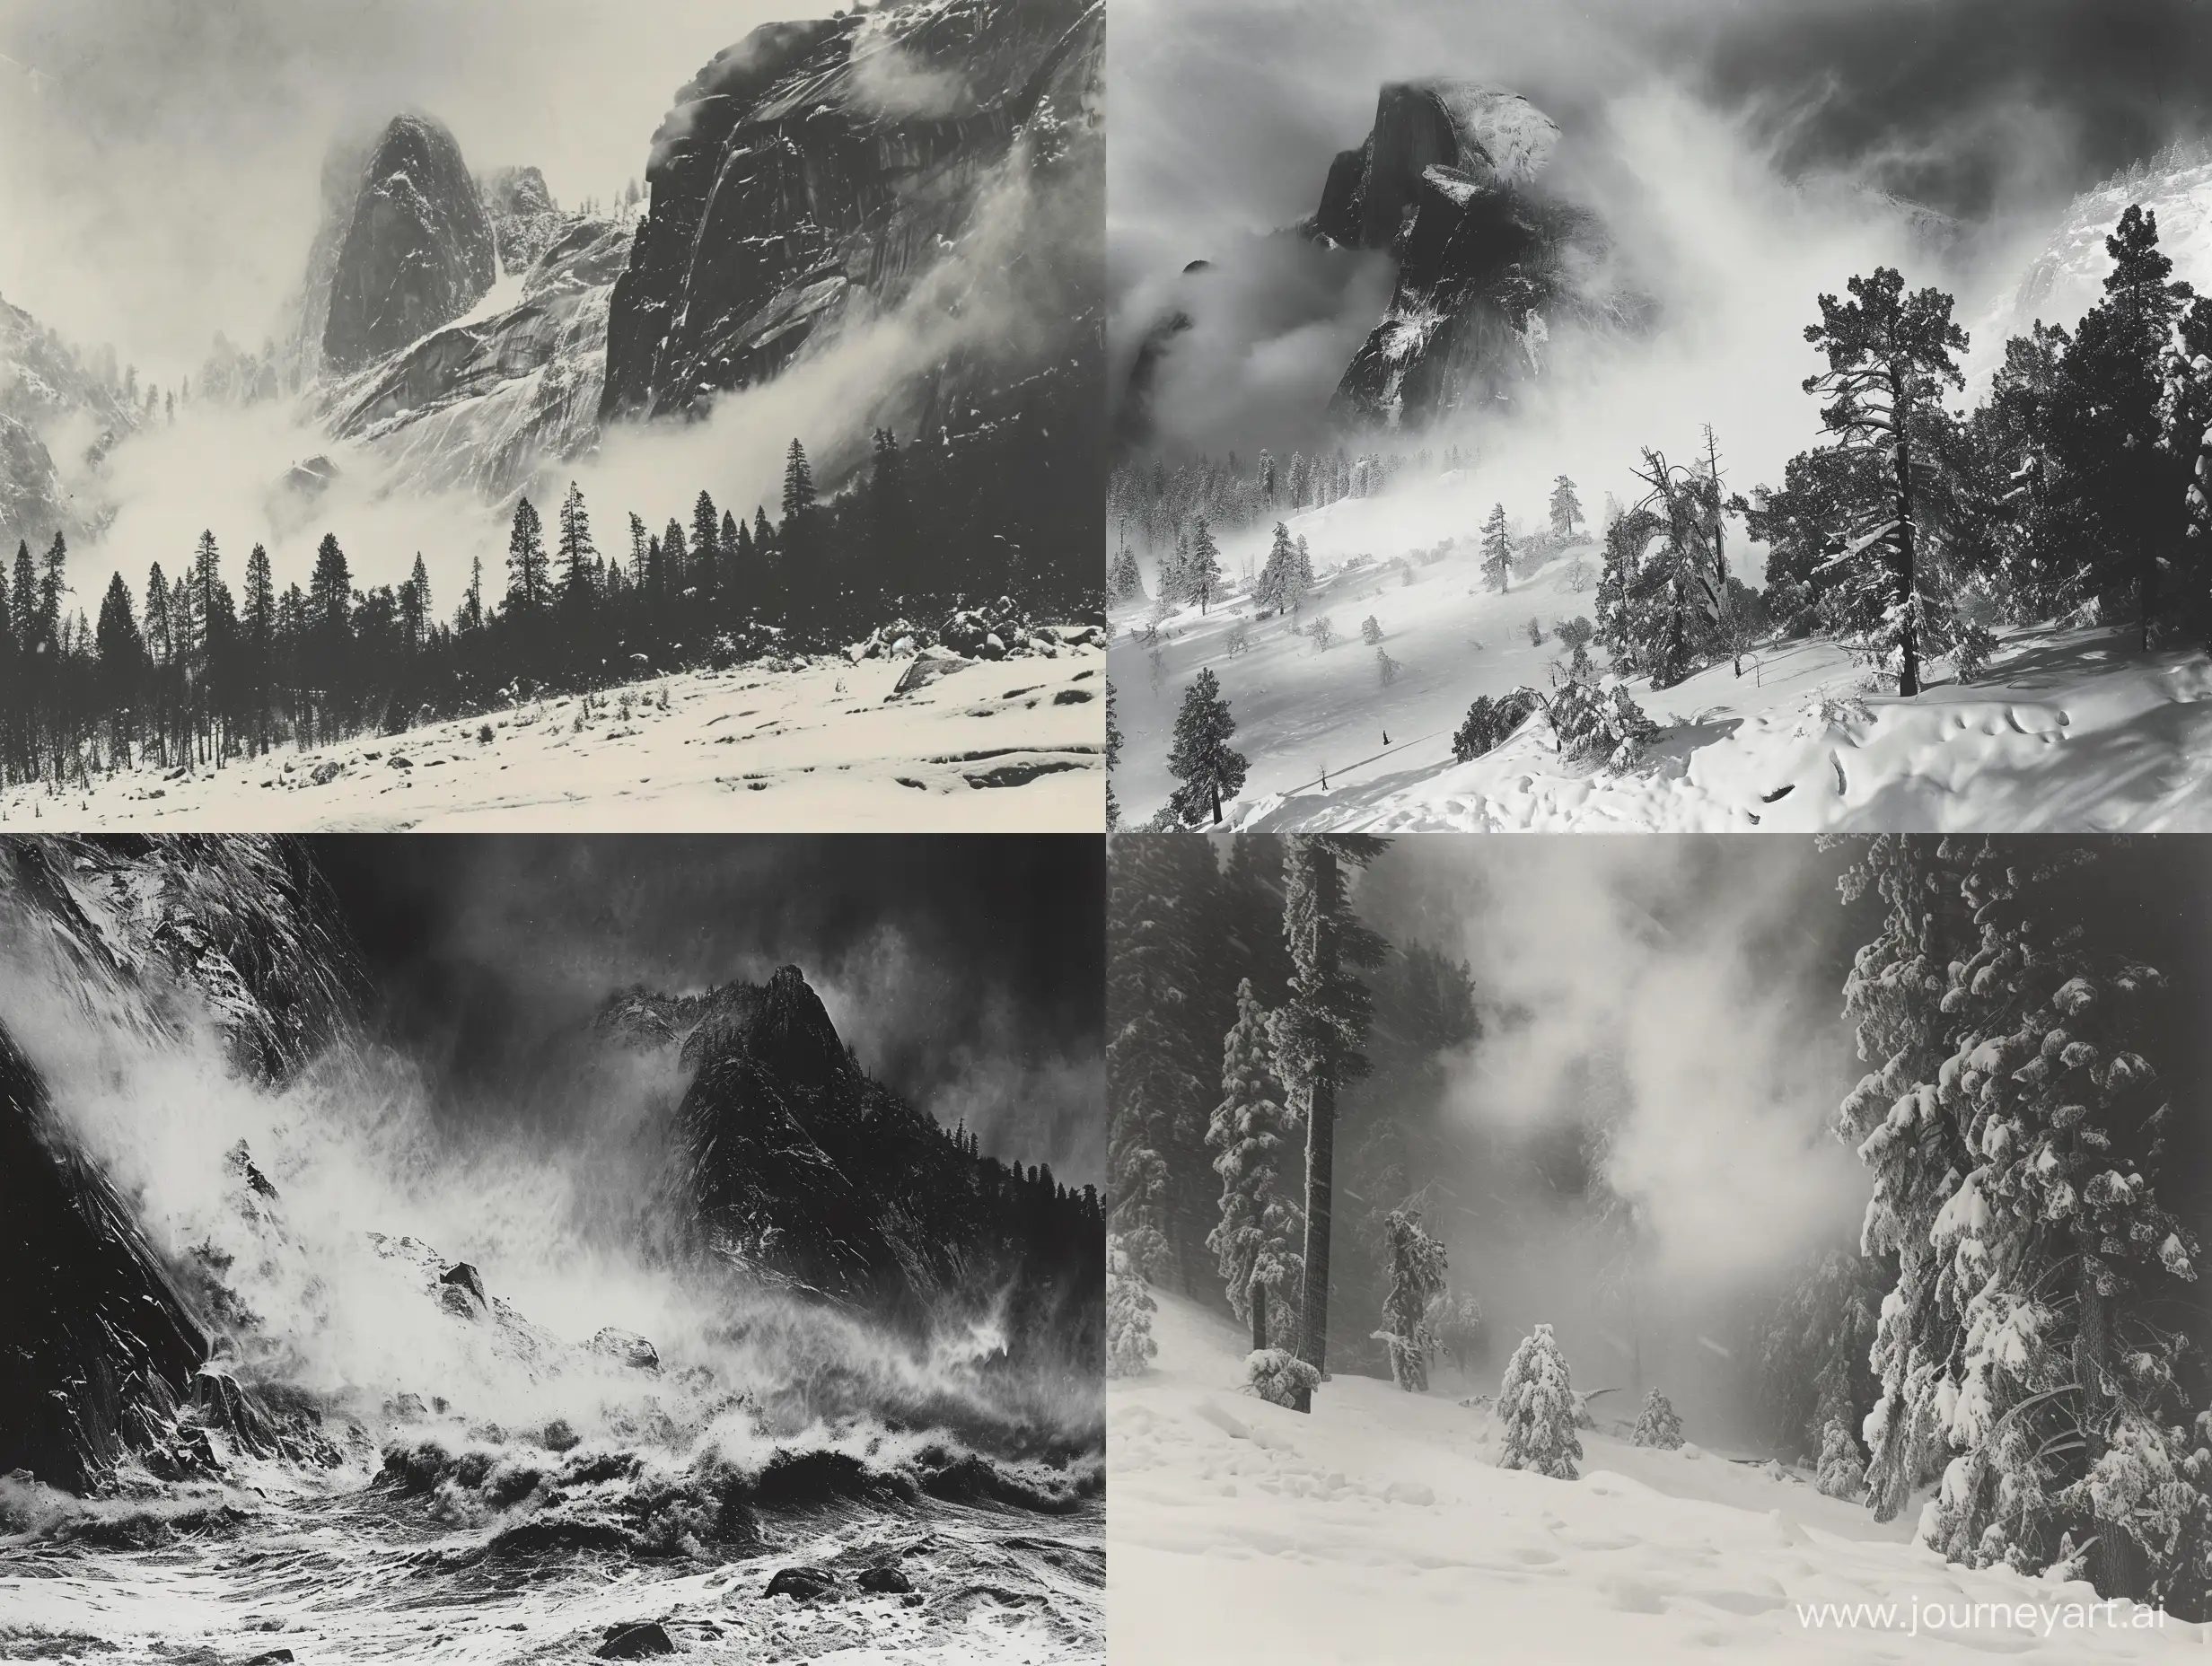 Ansel Adam's photograph titled Clearing Winter Storm, Yosemite National Park, c 1937